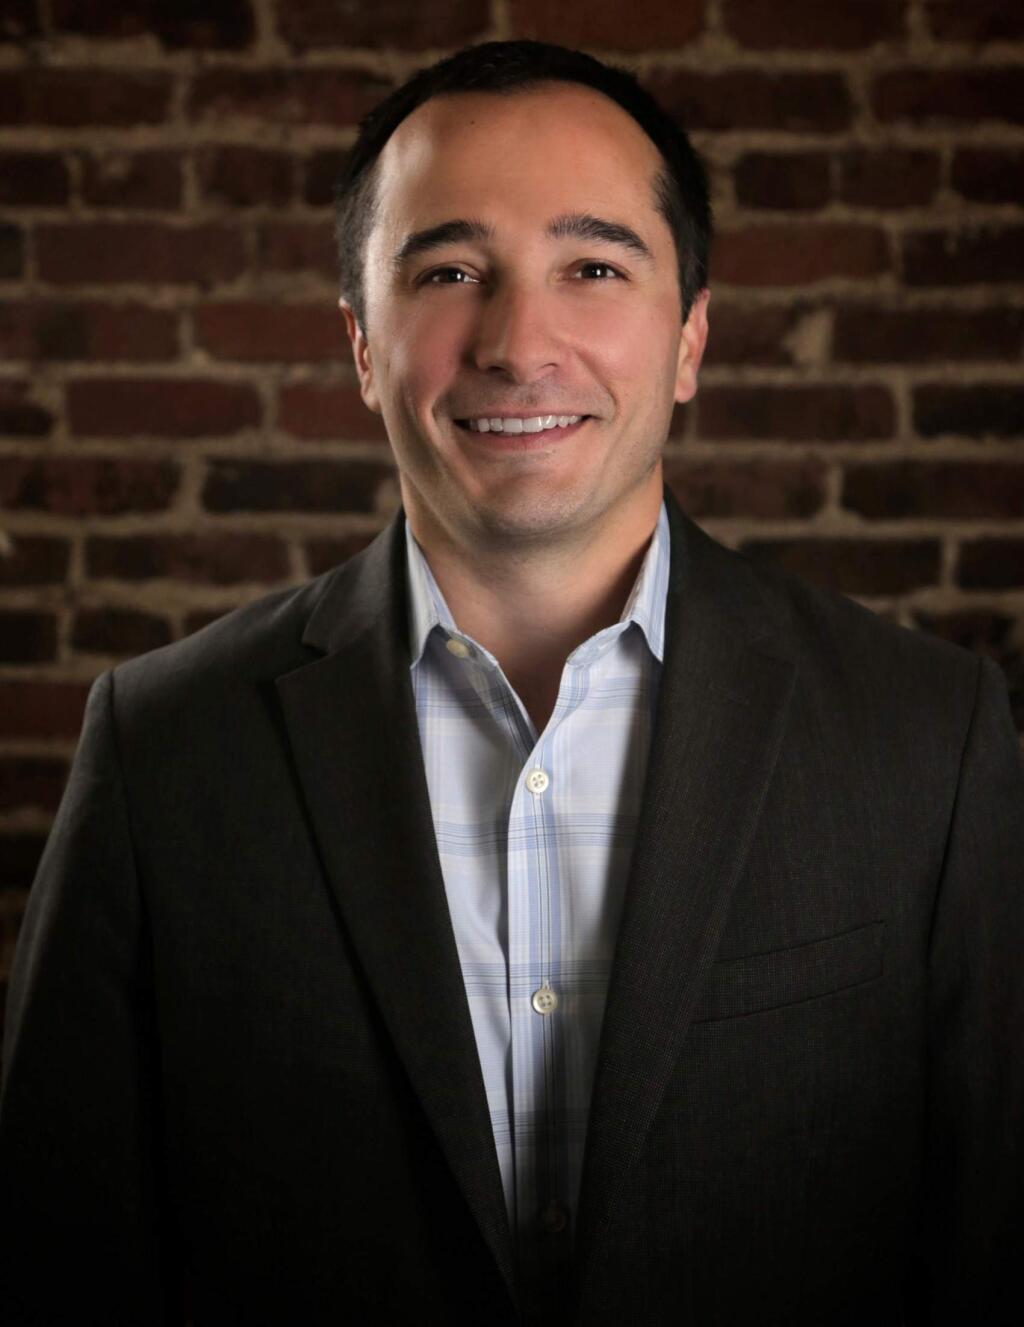 Ross Guehring, 38, partner in Lighthouse Public Affairs in San Rafael, is one of North Bay Business Journal's Forty Under 40 notable young professionals for 2019. (PROVIDED PHOTO)